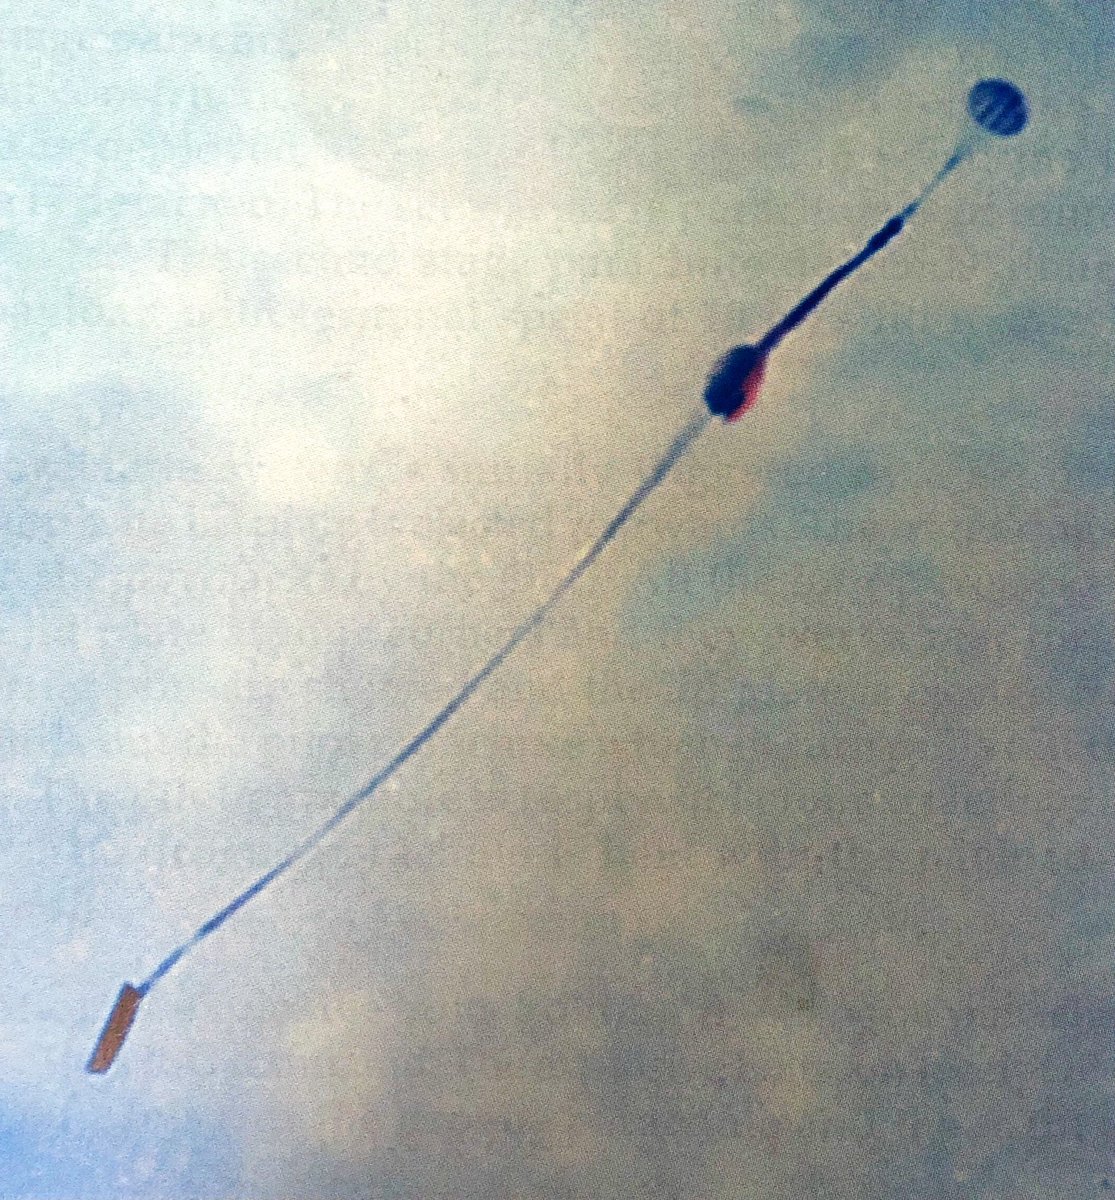 Agni I used off-the shelf components because it was built to demonstrate advanced reentry technologies. Pictured: the RV's flap-and 2-stage parachute recovery system—first a ribbon chute, then a circular main chute.